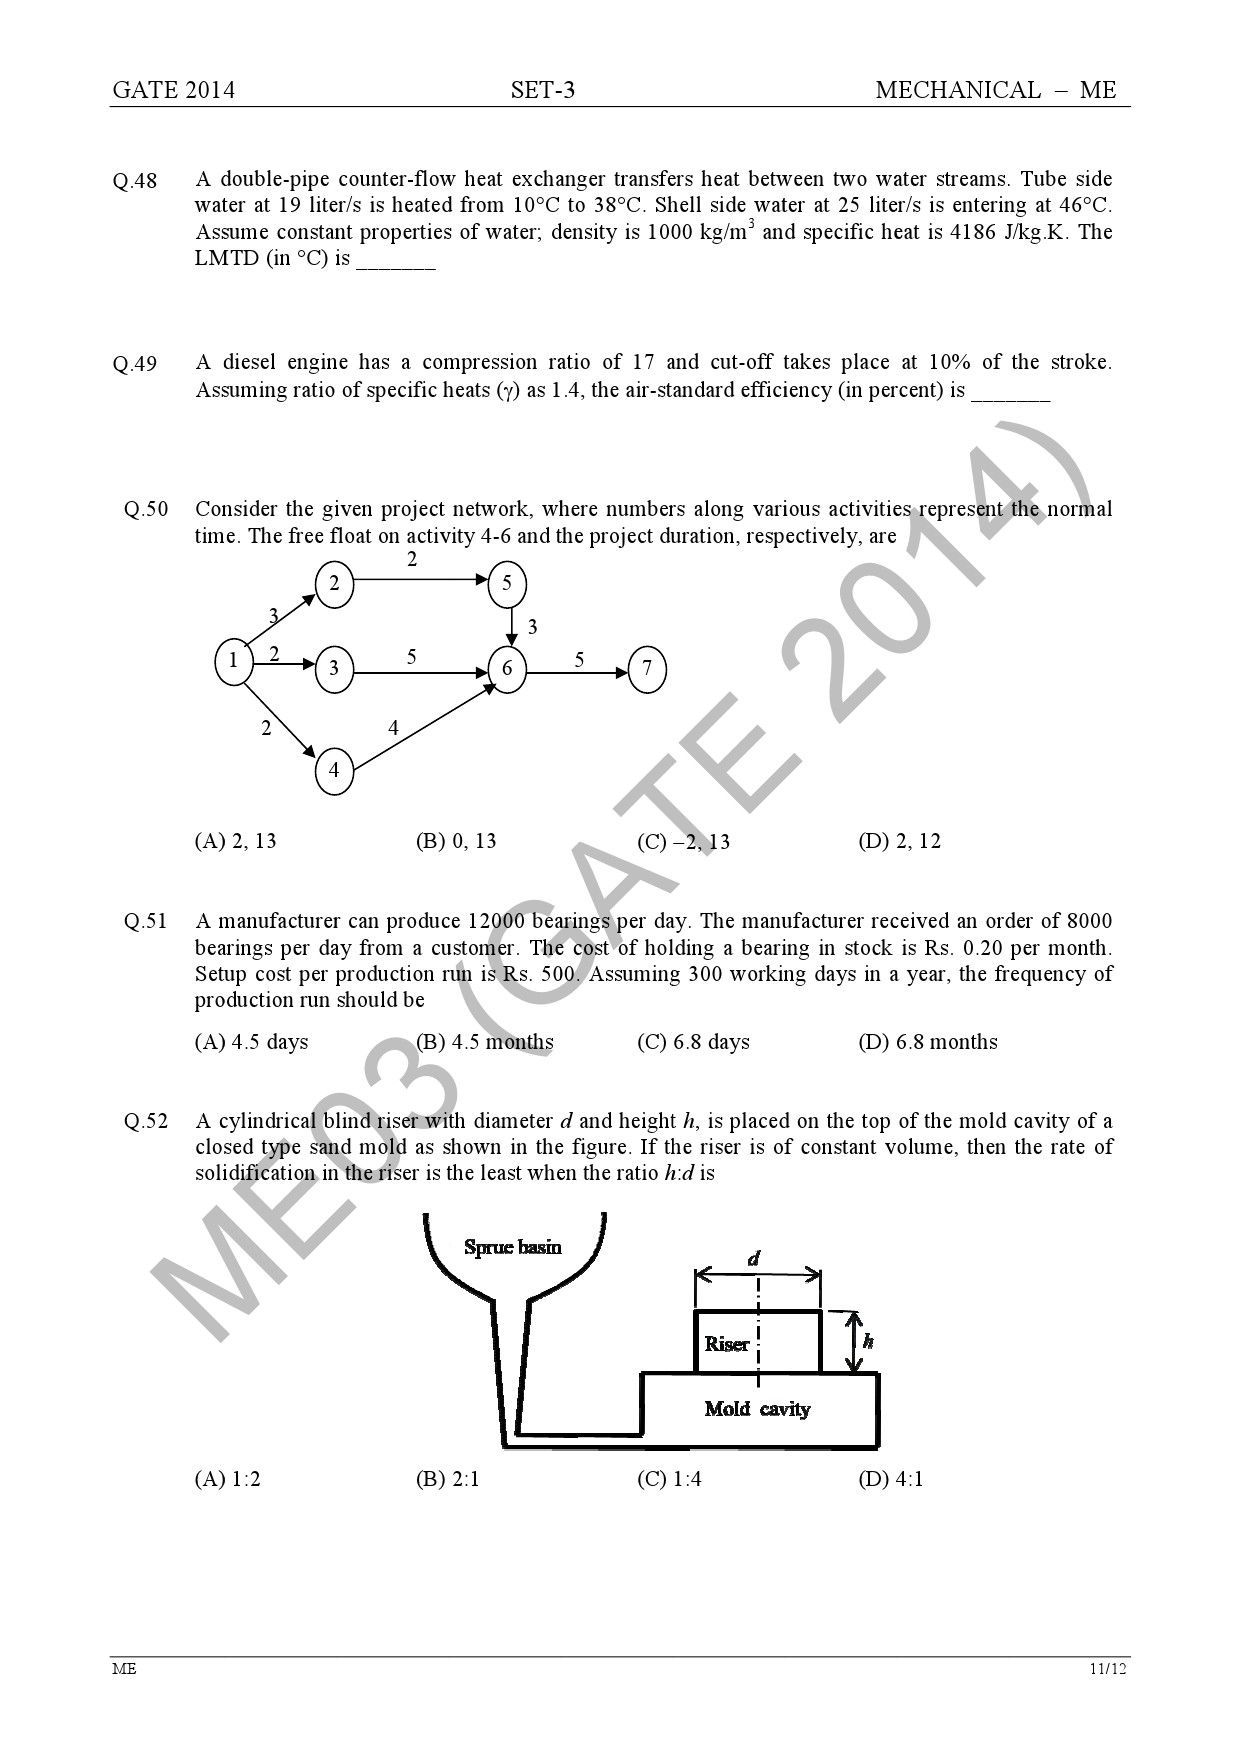 GATE Exam Question Paper 2014 Mechanical Engineering Set 3 18